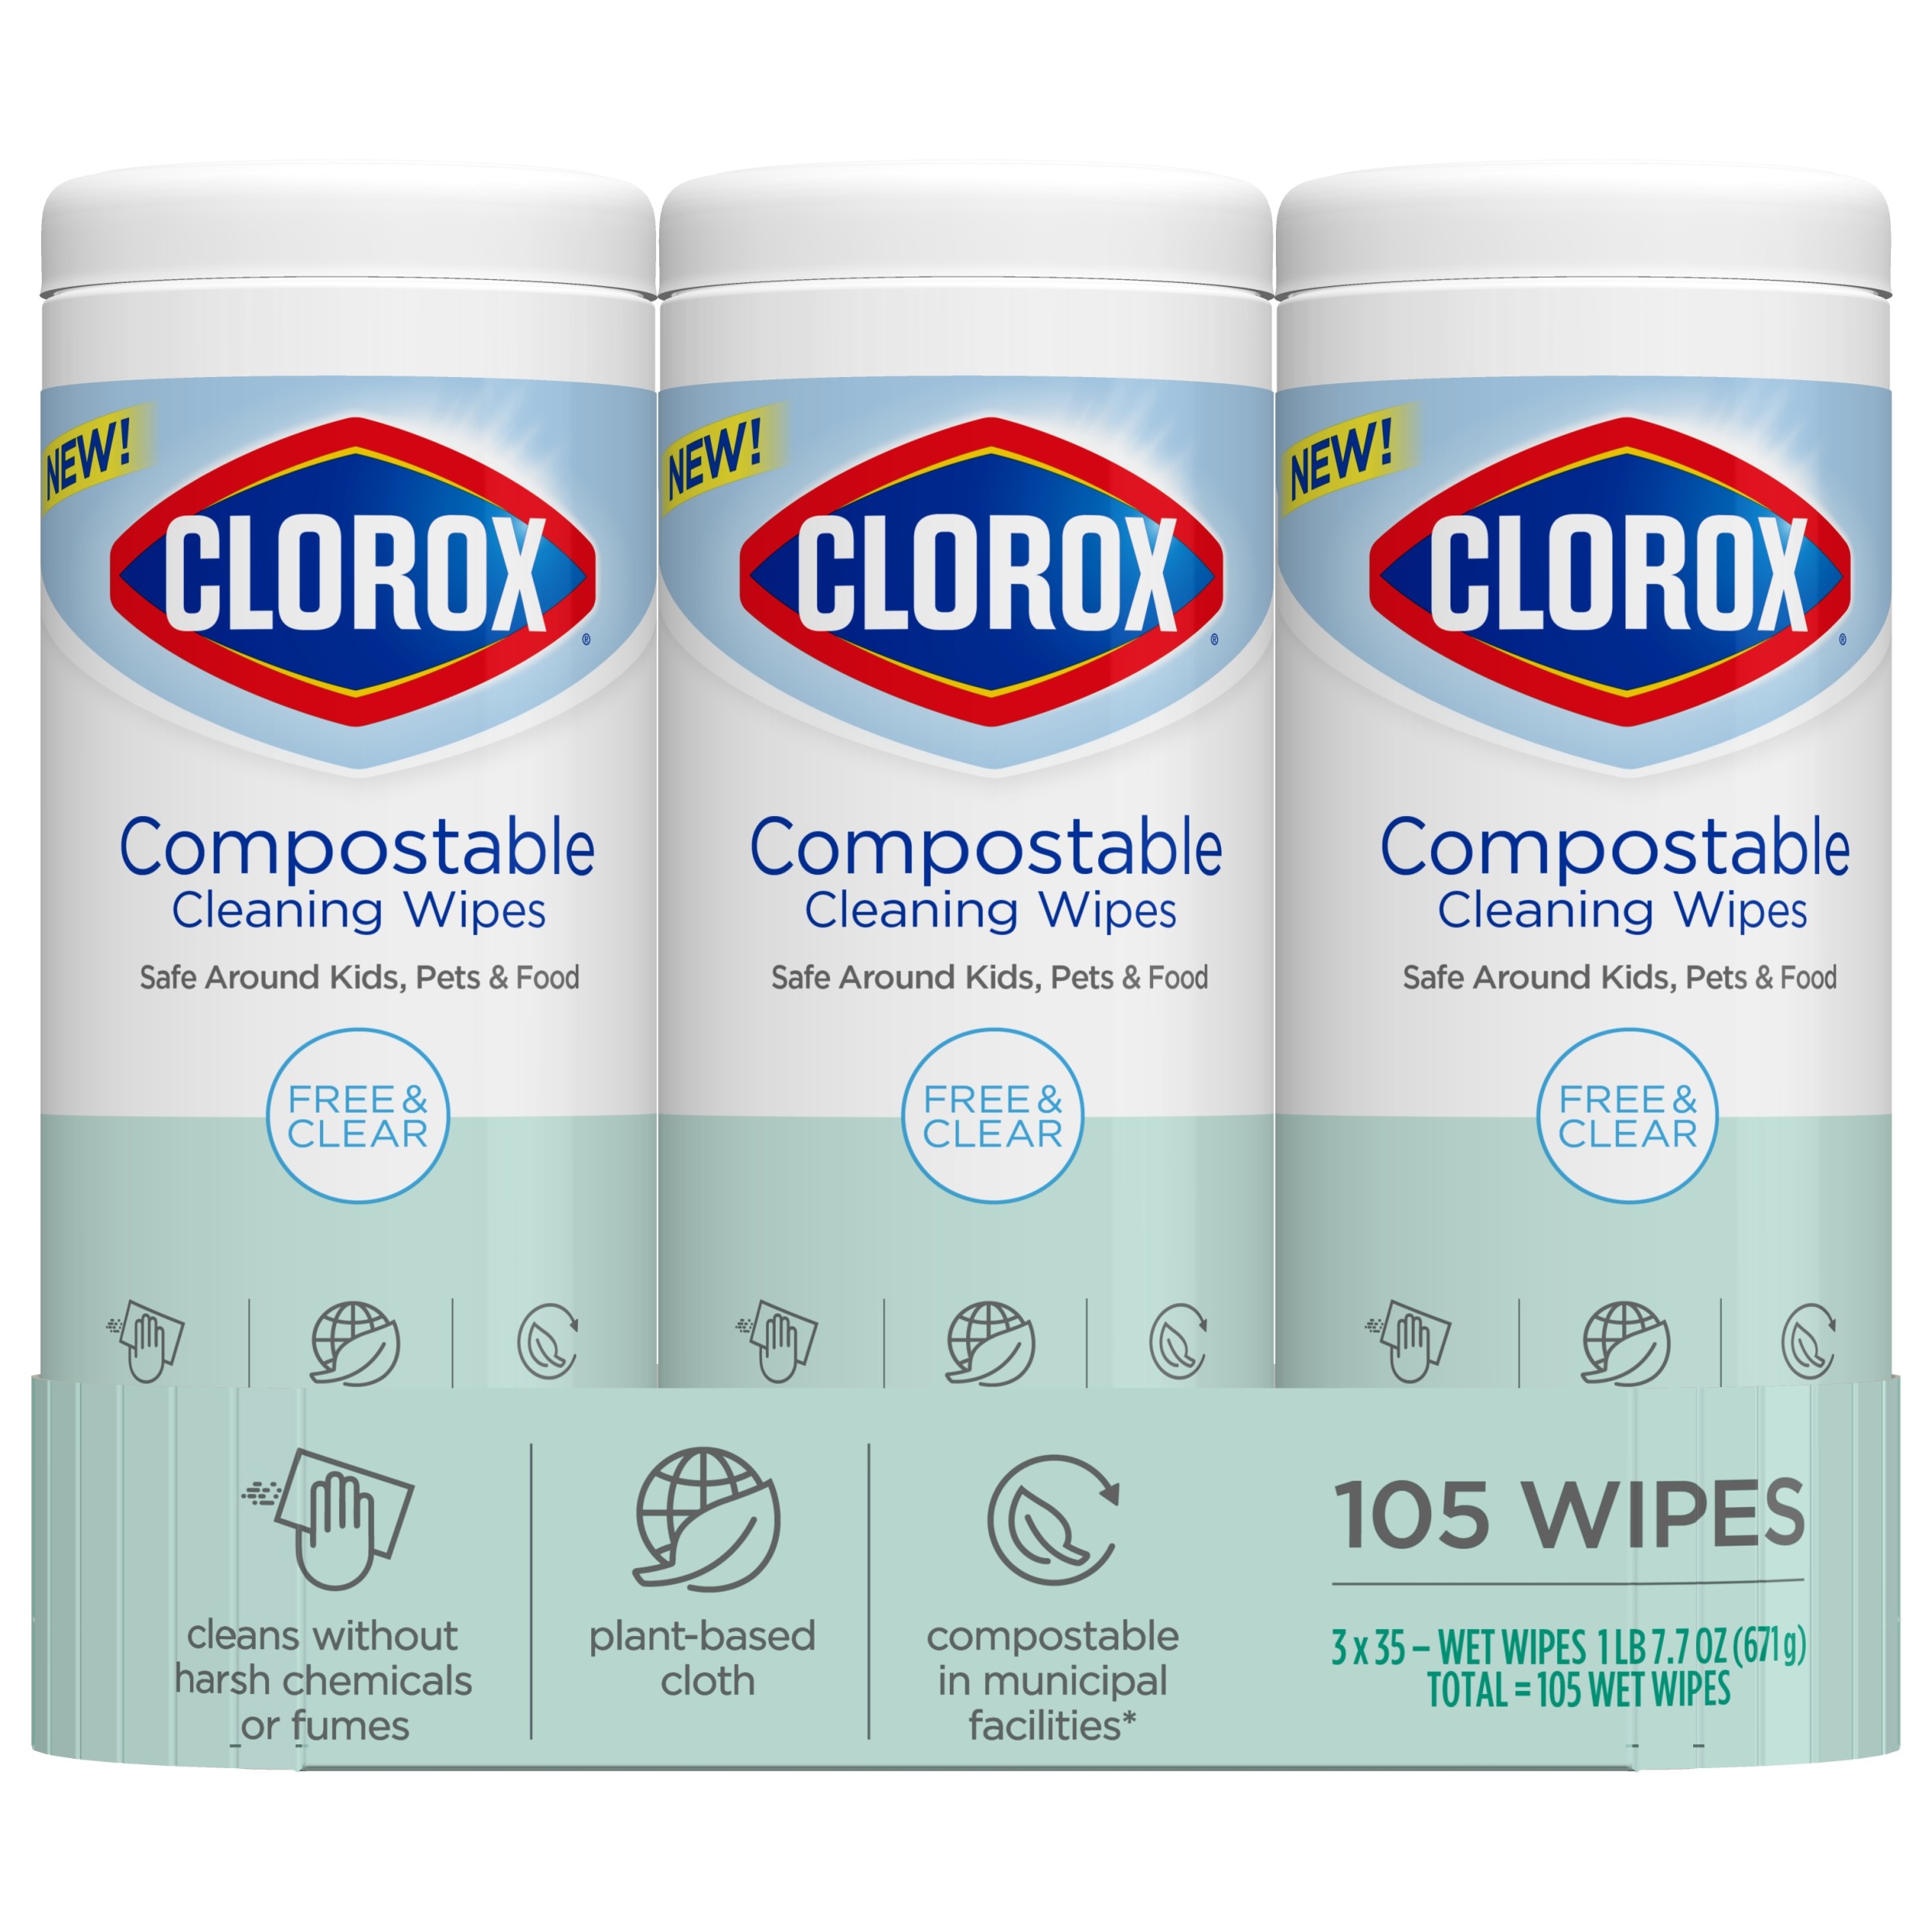 Clorox Compostable Cleaning Wipes - All Purpose Wipes - Unscented, Free & Clear, 35 Count Each - Pack of 3 - image 3 of 12